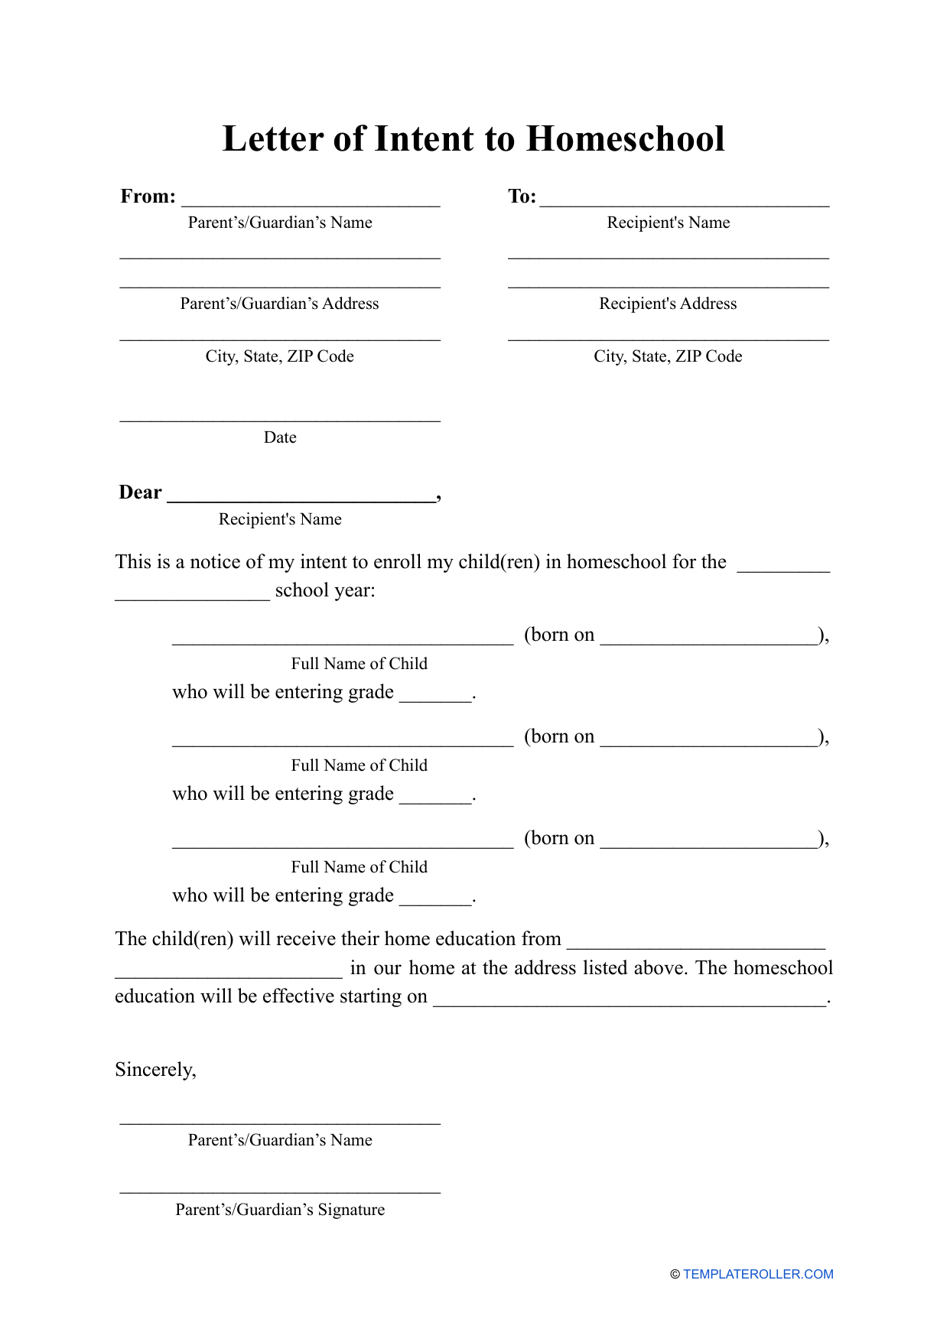 Letter Of Intent To Homeschool Template Download Printable Pdf 433